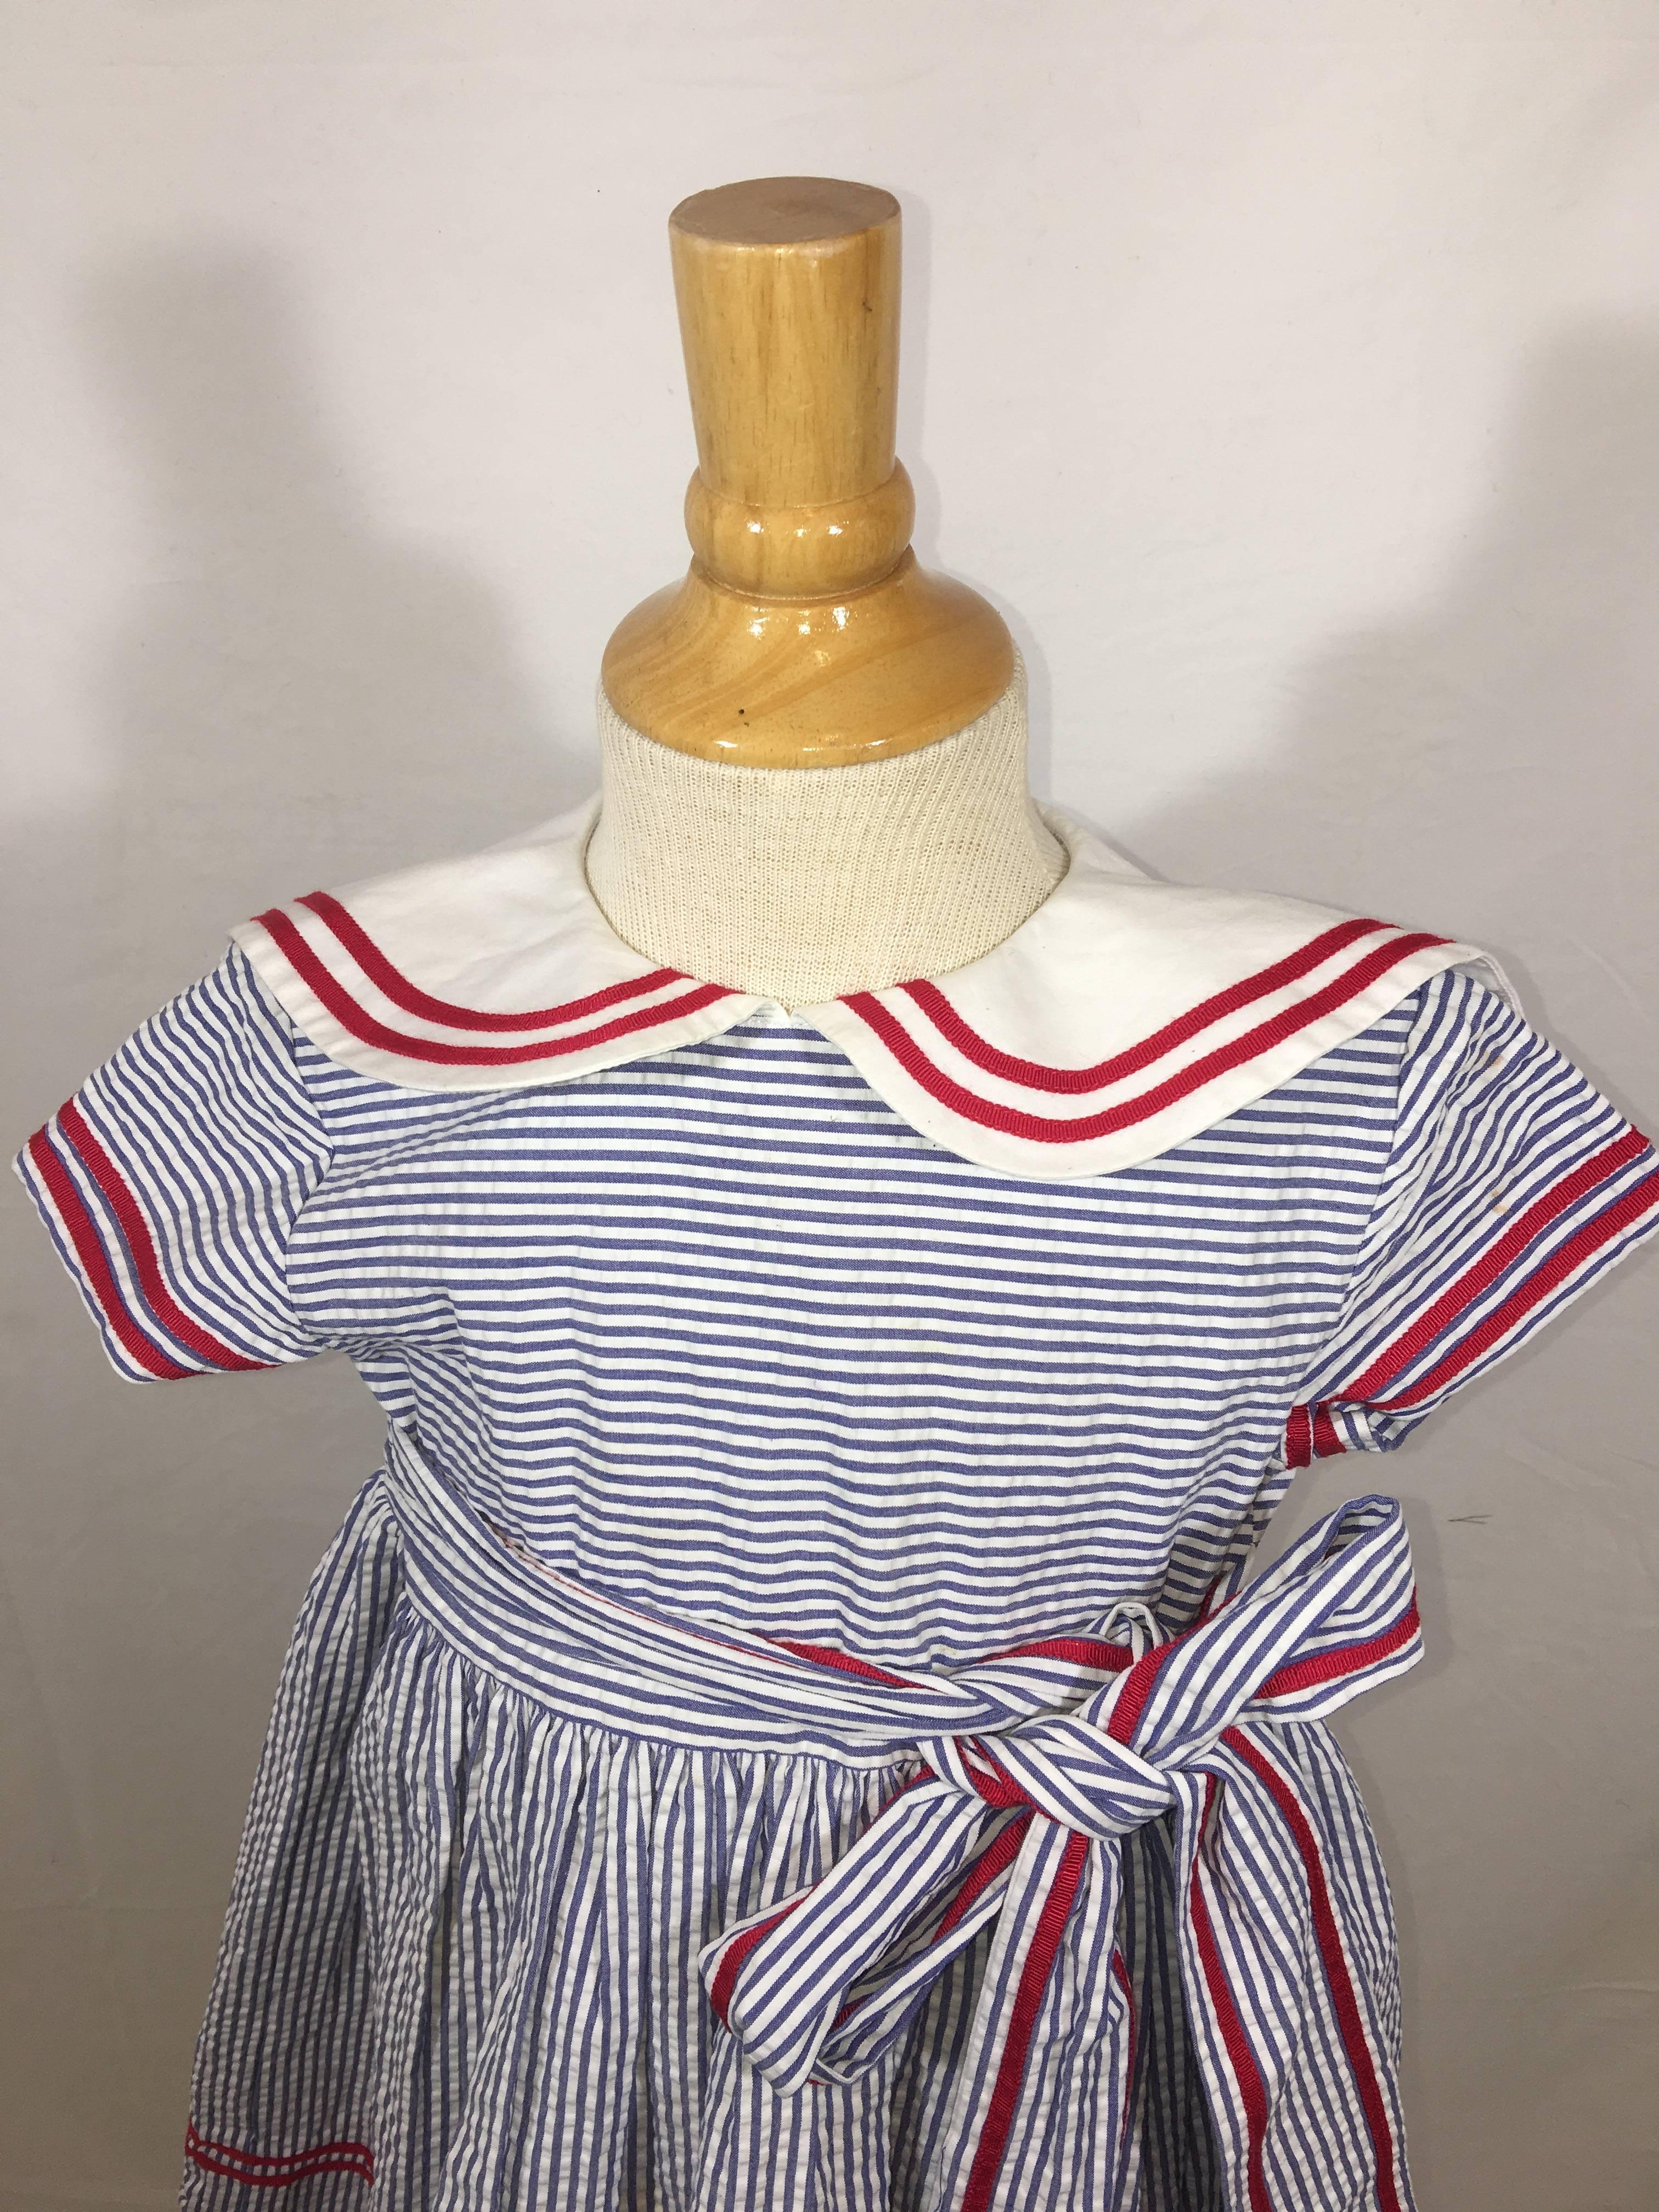 Kids Oscar de la Renta Short Sleeve Dress. White and Blue Striped with Peter Pan Collar and Red Details. Ties at Waist.